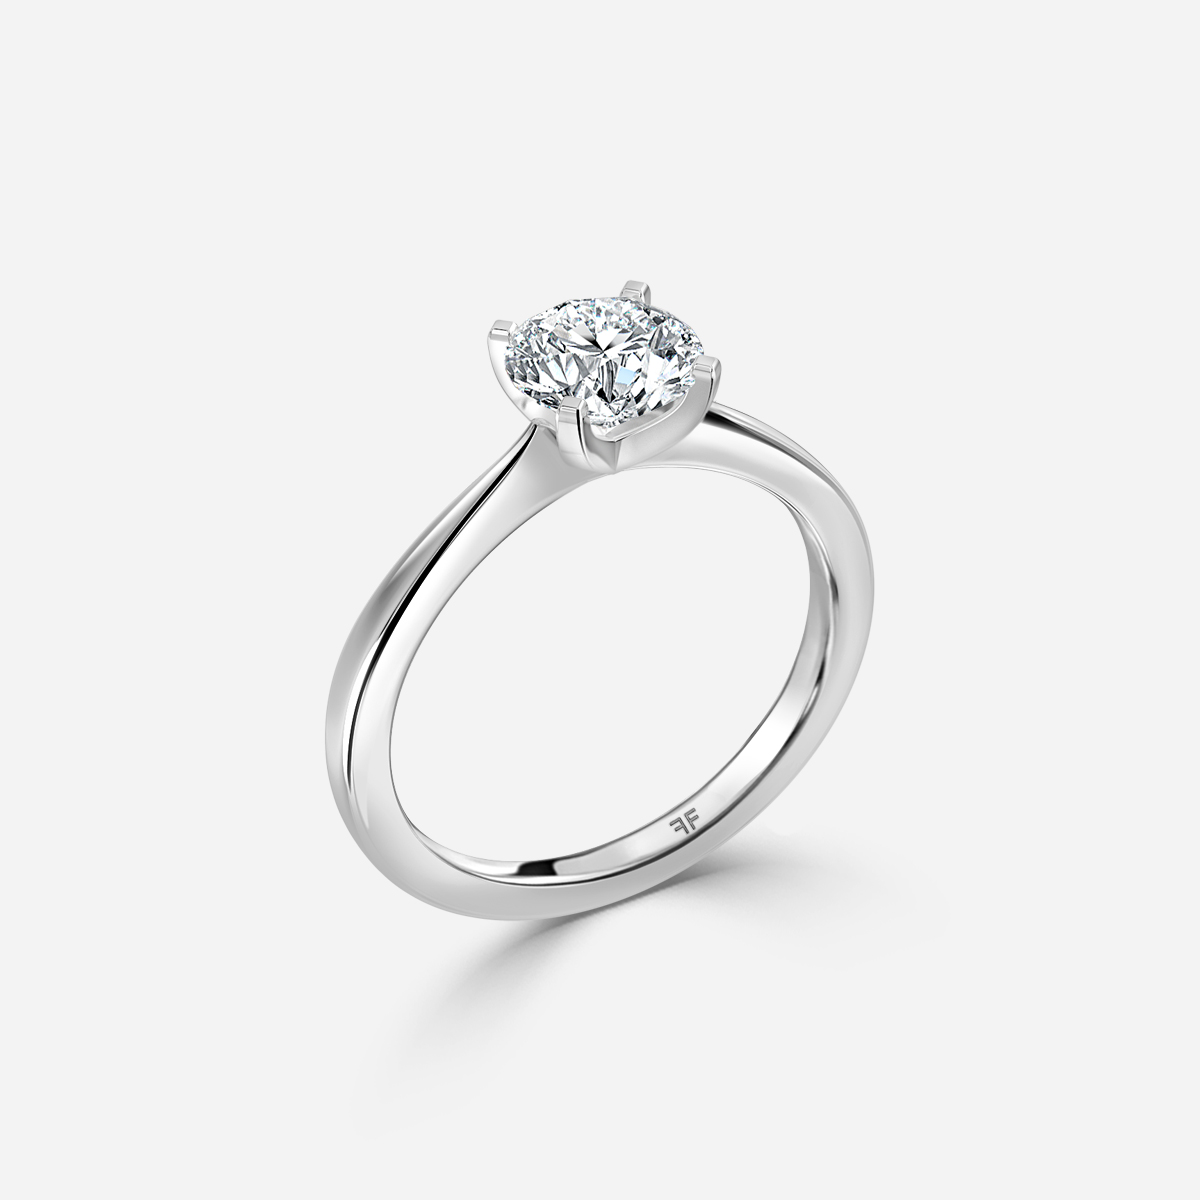 Firefly White Gold Solitaire Engagement Ring